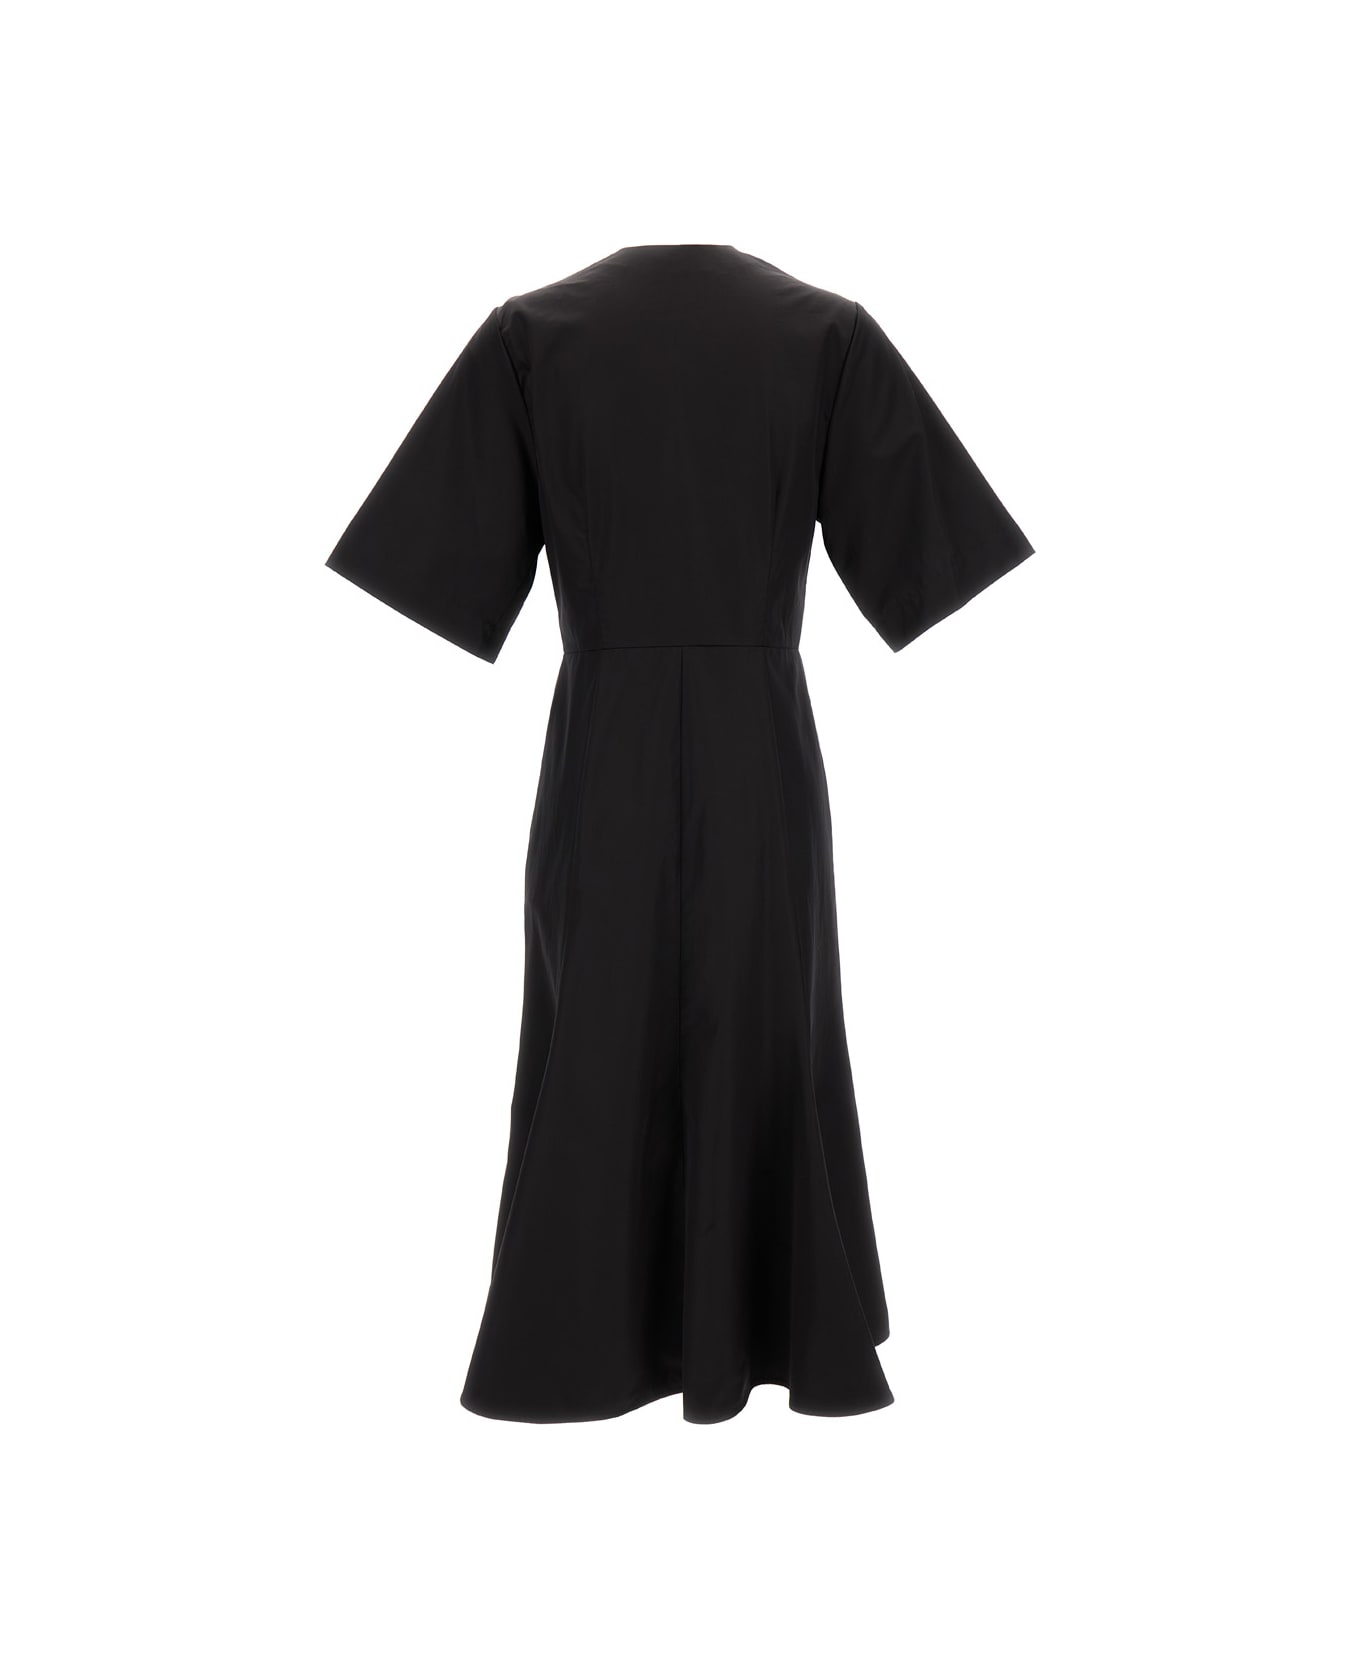 Ami Alexandre Mattiussi Midi Black Dress With Short Sleeves And Hidden Tab In Cotton Woman - Black